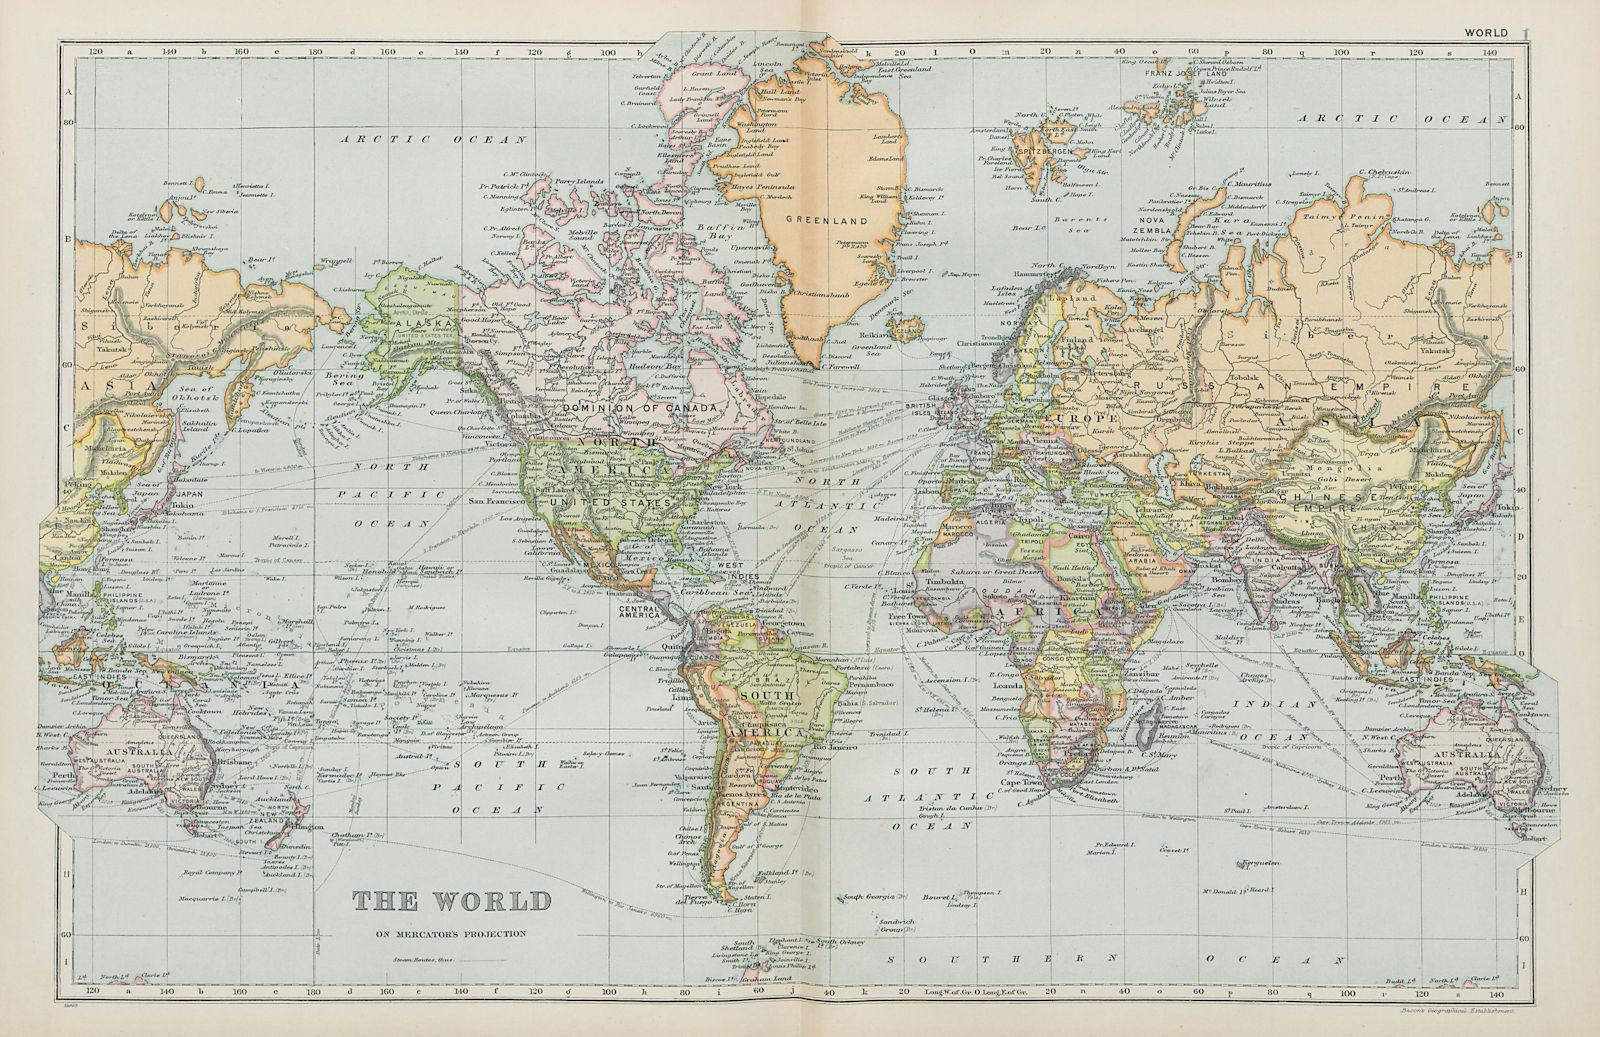 WORLD. on Mercator's Projection. Shipping routes. BACON 1900 old antique map